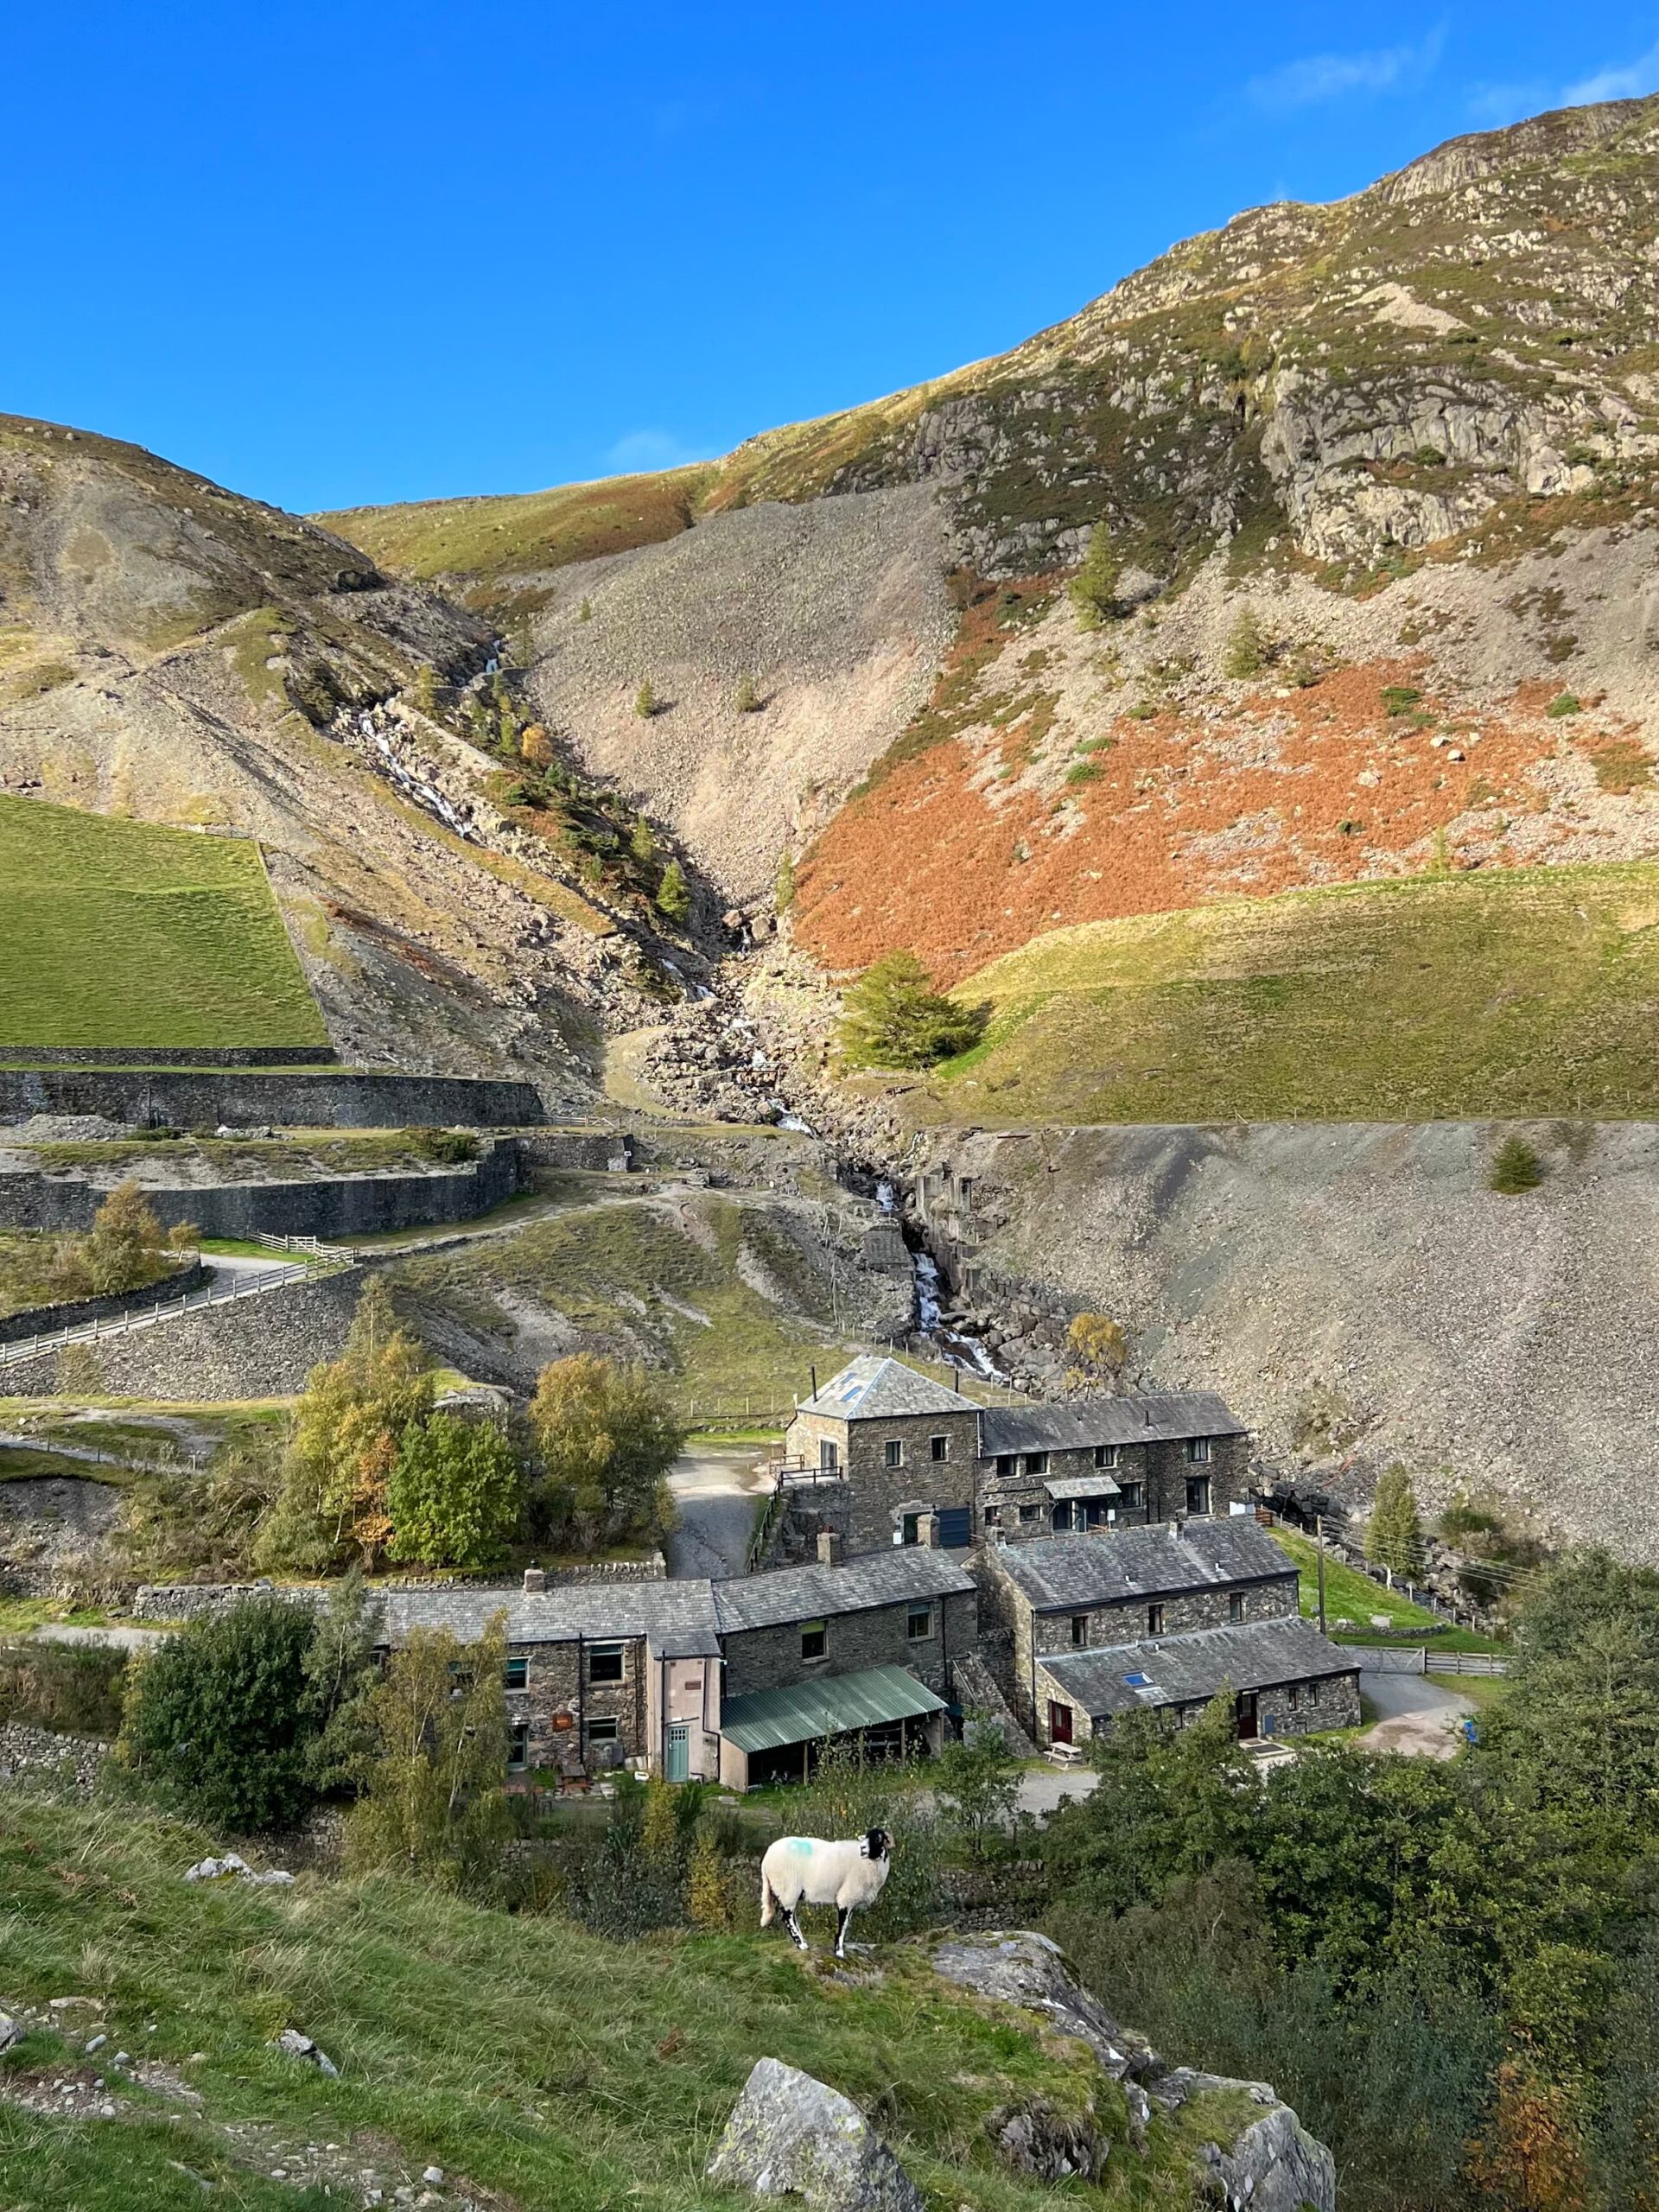 Image of old stone buildings at Greenside Mine with a stream coming down the hills in the background.